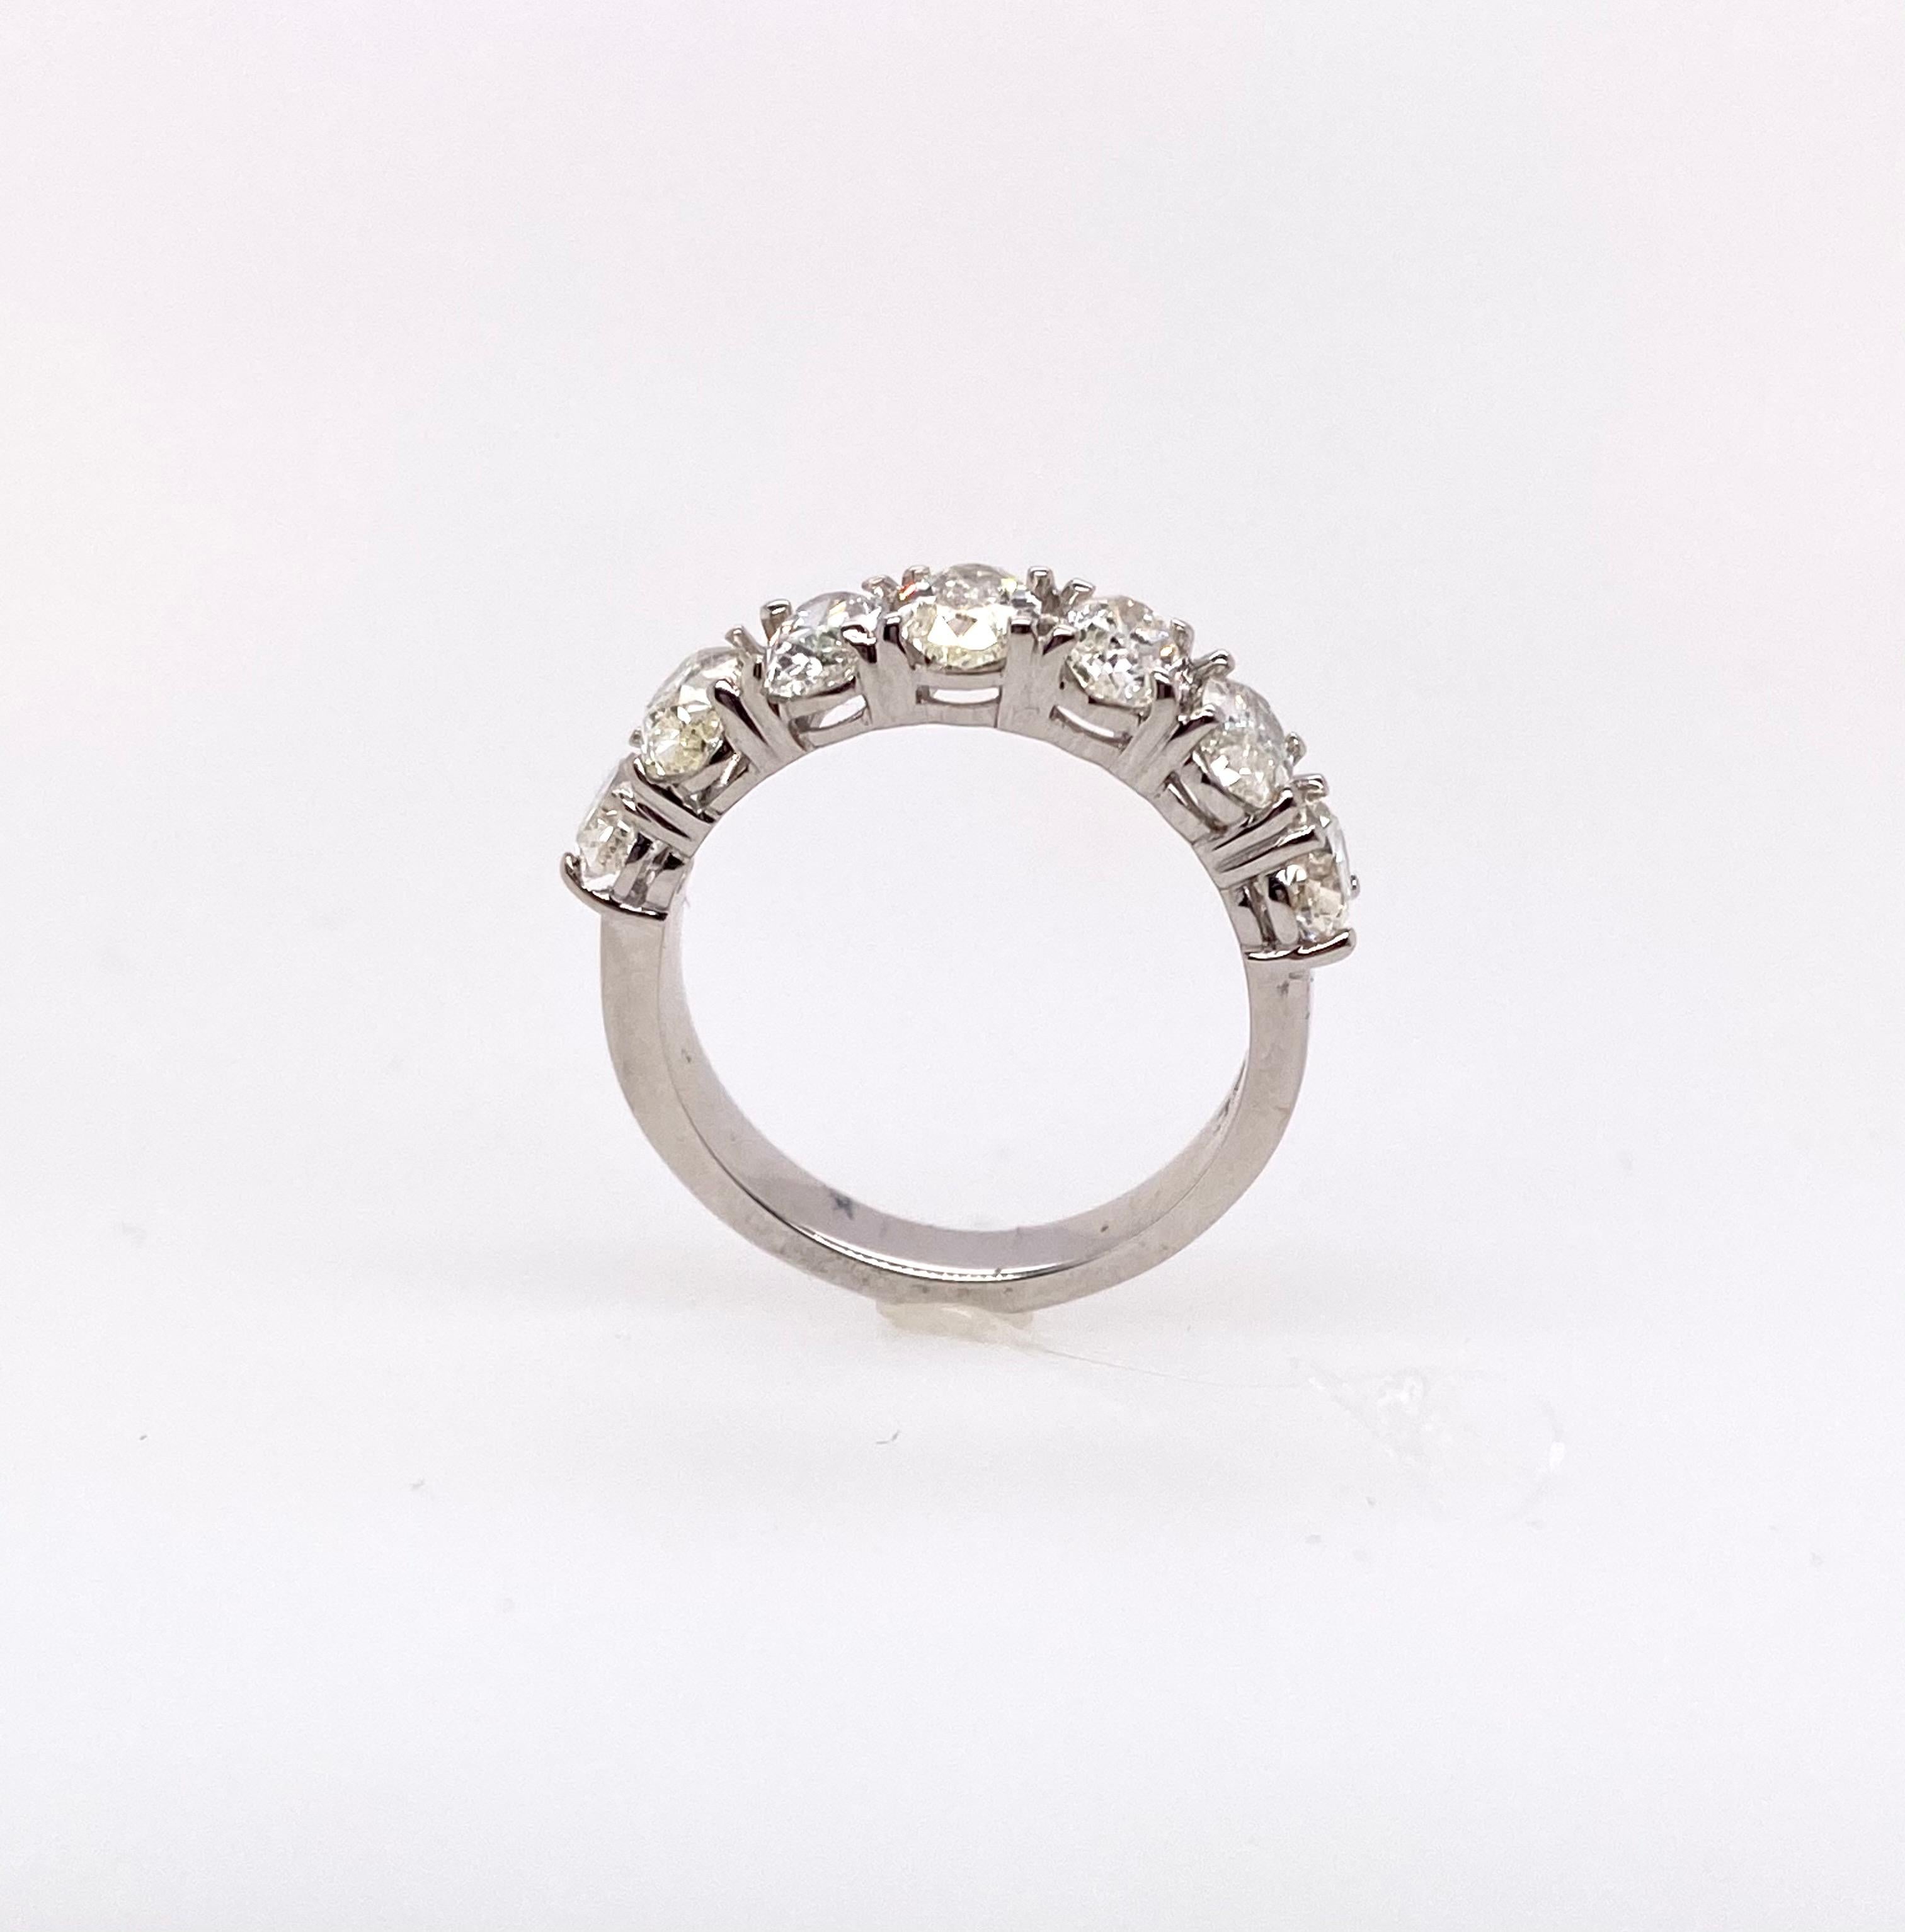 This beautiful seven-stone diamond ring features a classic statement and simple look. As a total weight of diamonds, 2.88 carat for seven oval diamonds mounted in the 18K white gold ring, beautifully. Traditional classic and timeless look. It is